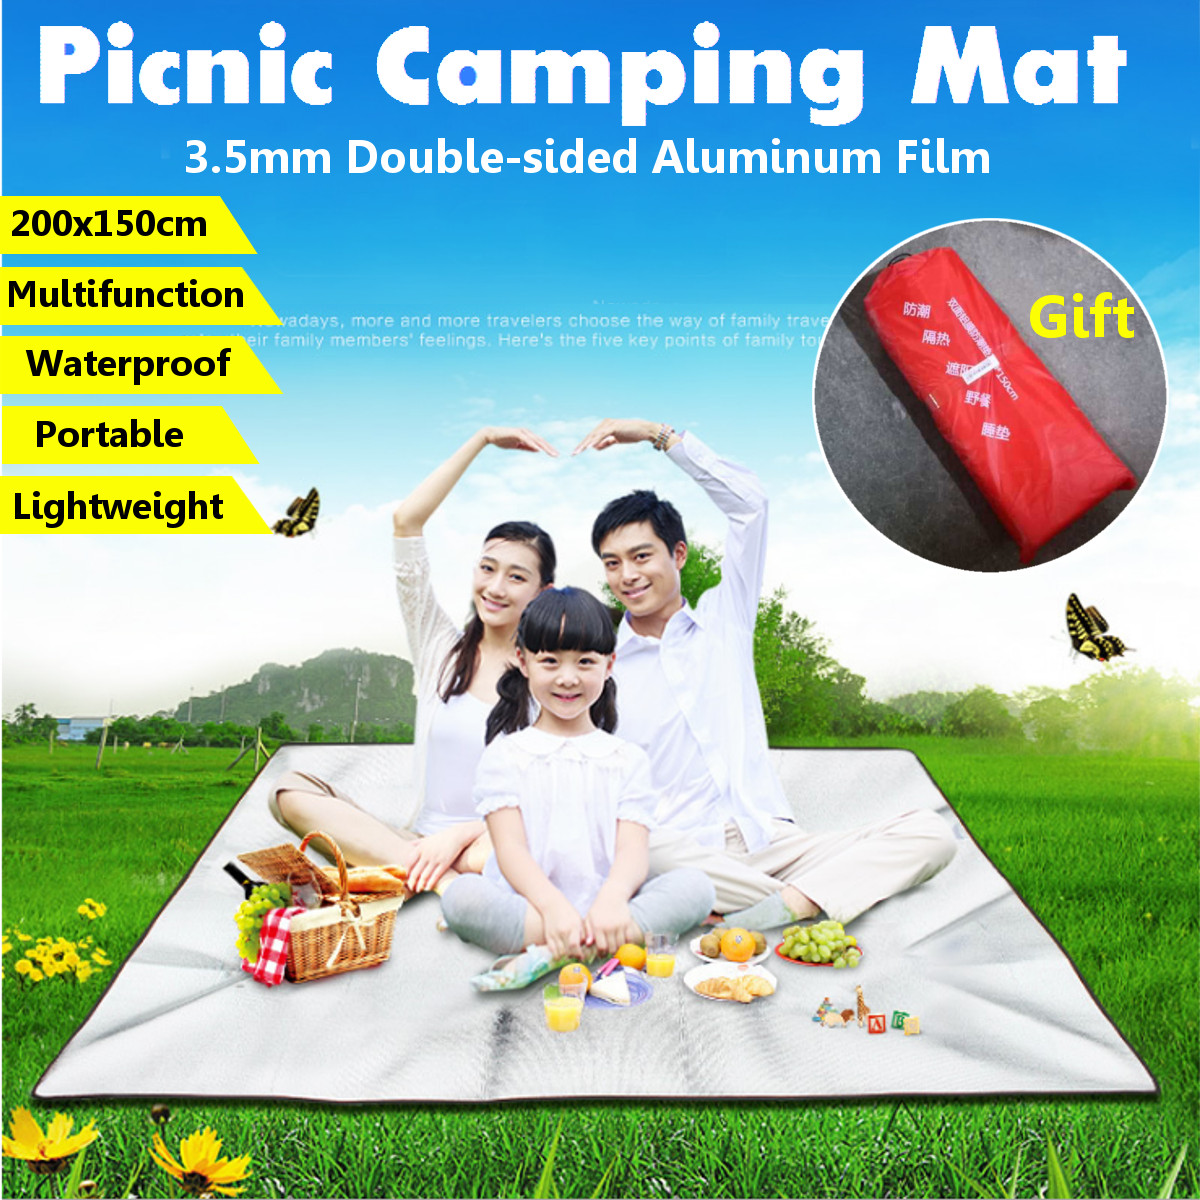 Outdoor-Double-sided-Tent-Mat-Aluminum-Film-Pad-Waterproof-Camping-Picnic-Blanket-1514848-2